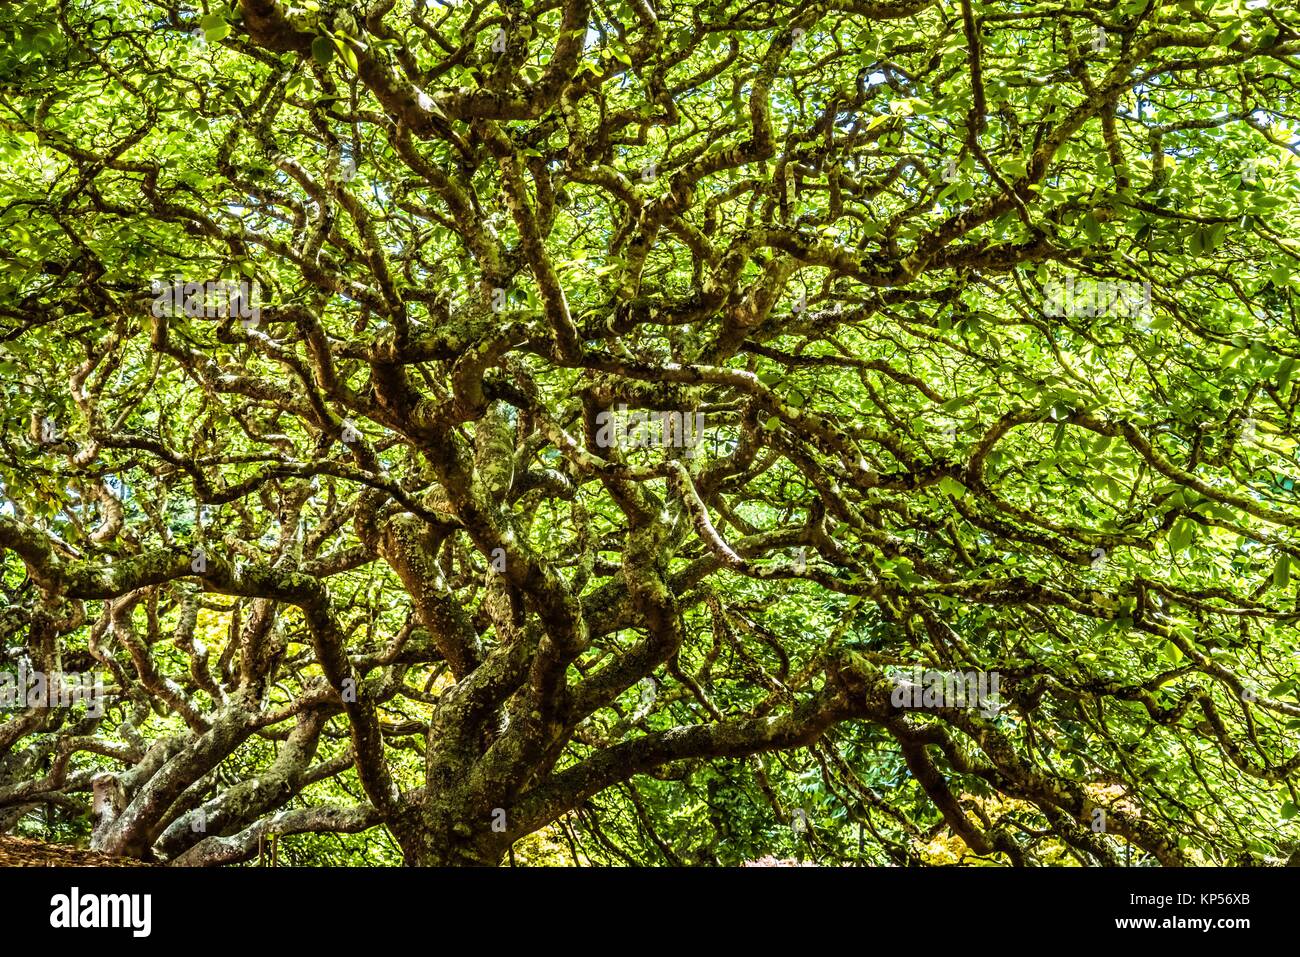 Branch of a tree. Stock Photo